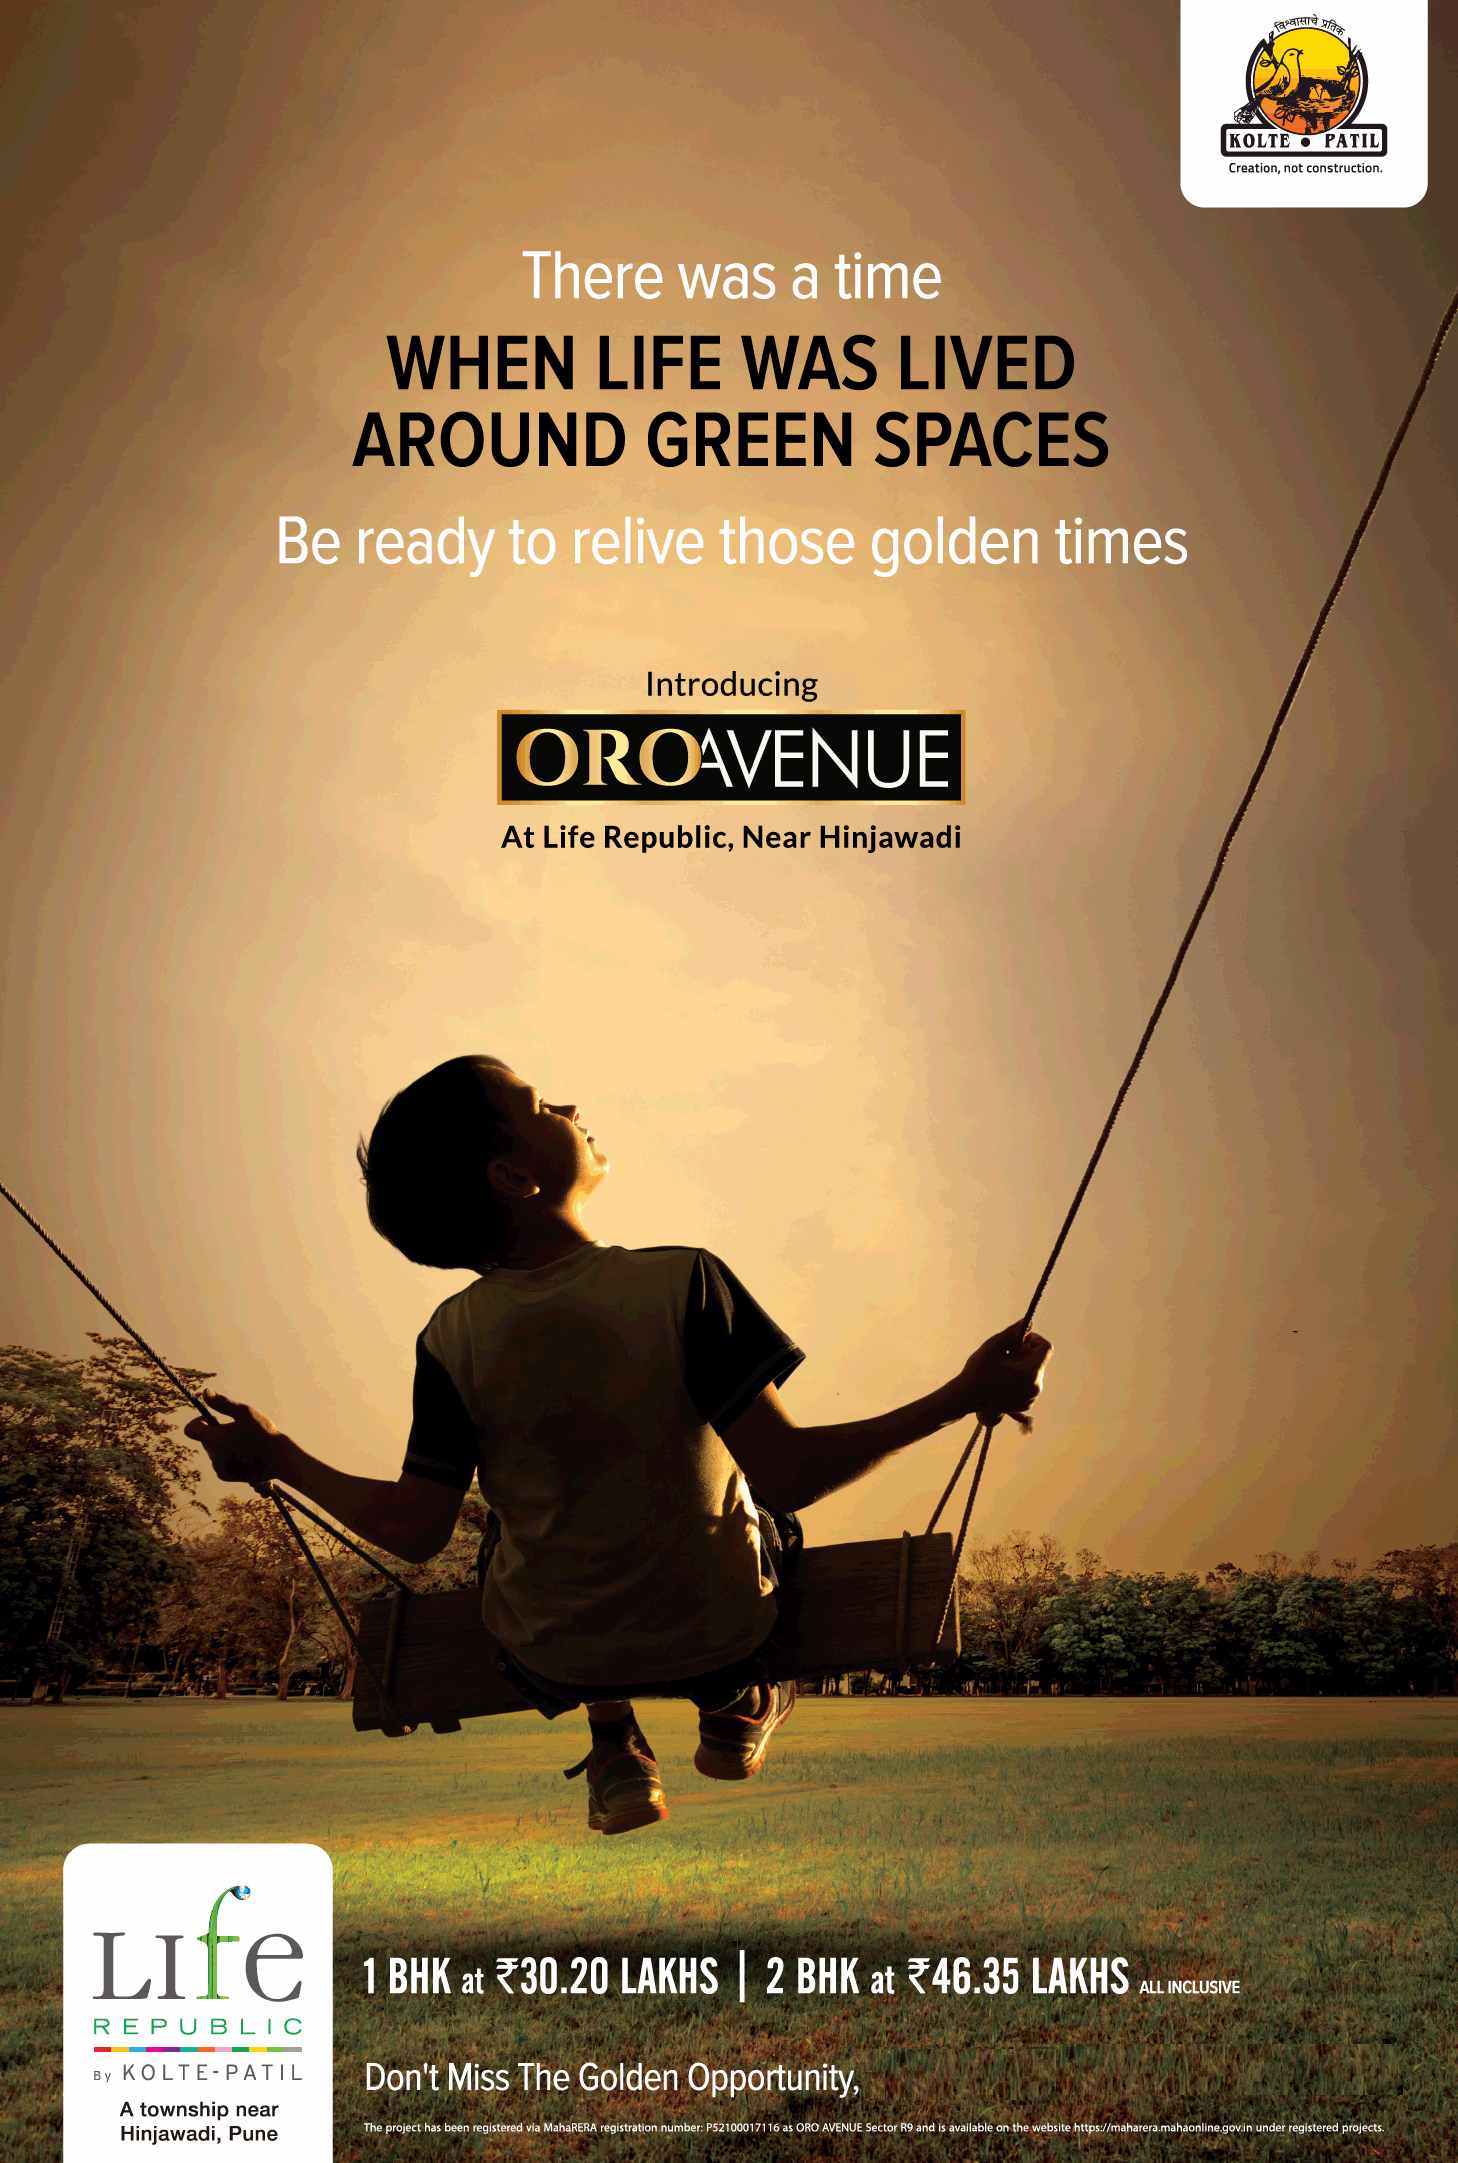 Introducing Oro Avenue at Kolte Patil Life Republic in Pune